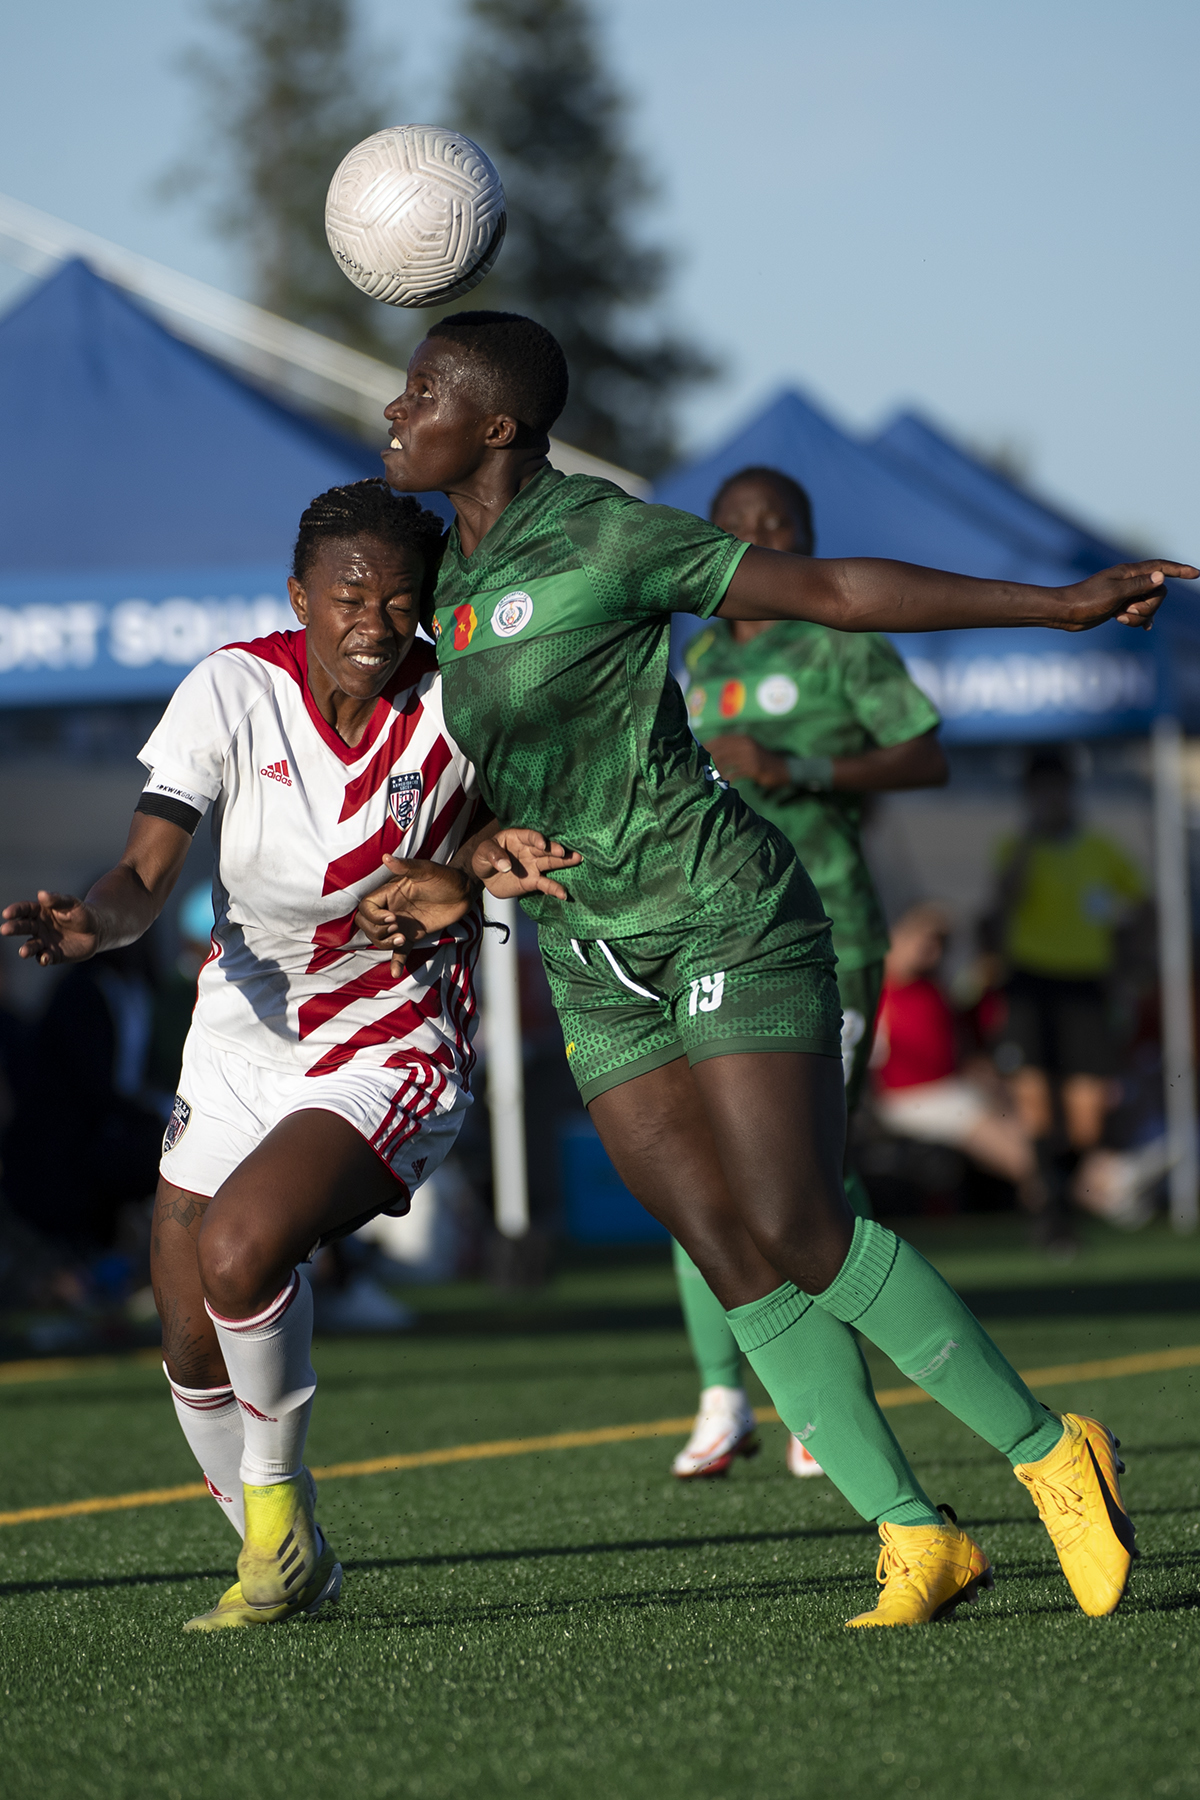 Cameroon Edges U.S. in 2-1 Win in CISM's World Military Women's Football  Championship > Armed Forces Sports > Article View